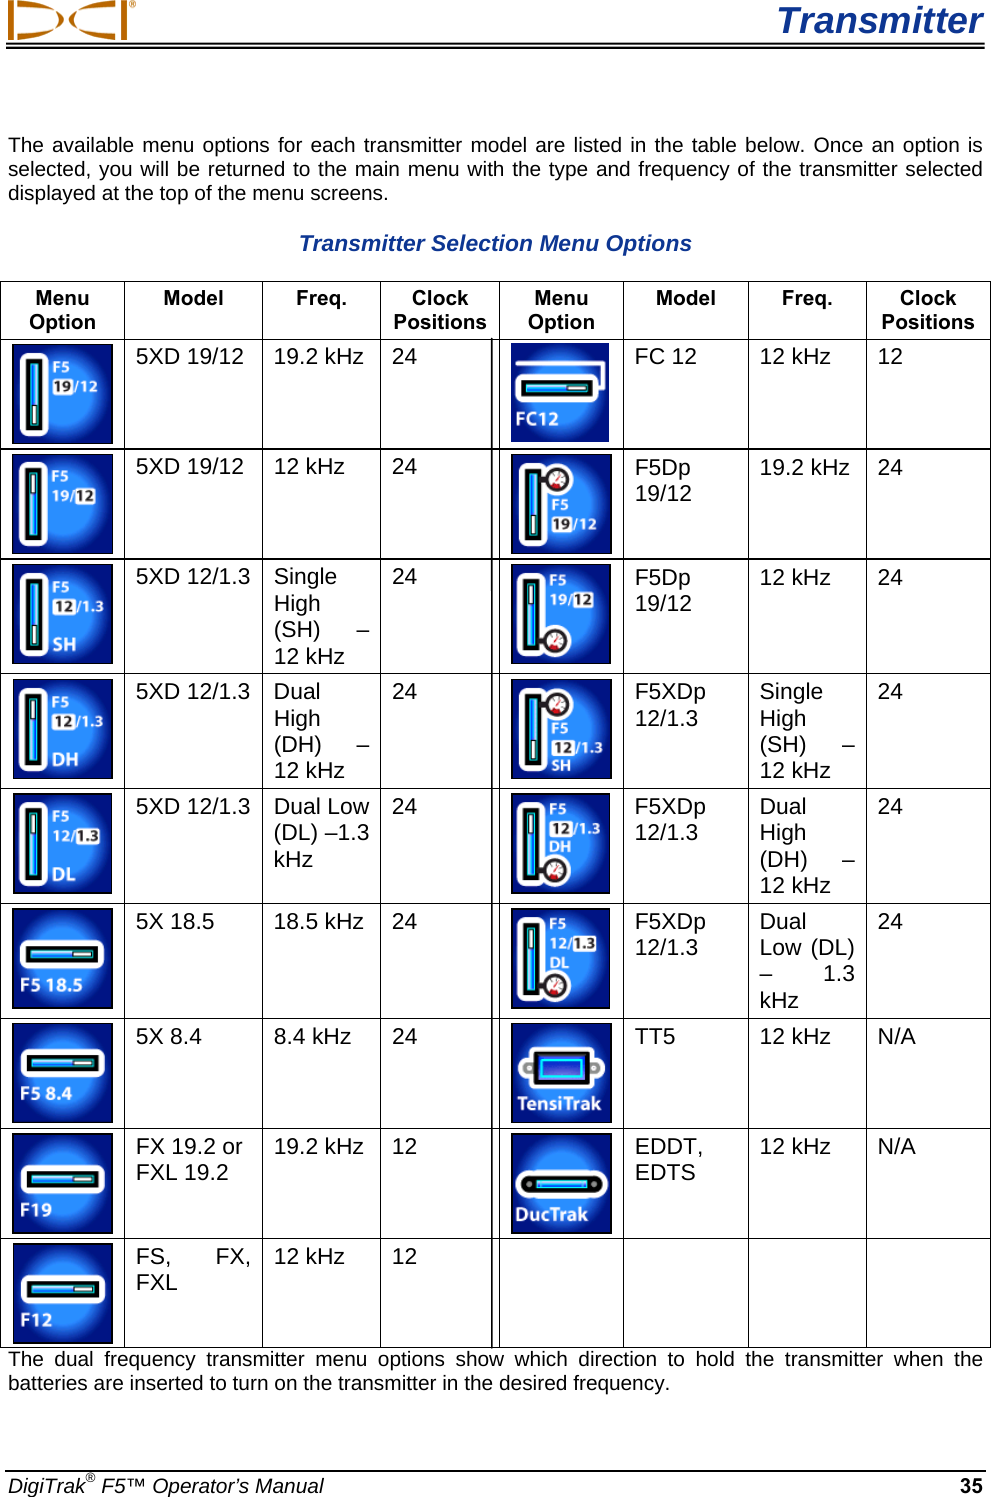  Transmitter DigiTrak® F5™ Operator’s Manual 35 The available menu options for each transmitter model are listed in the table below. Once an option is selected, you will be returned to the main menu with the type and frequency of the transmitter selected displayed at the top of the menu screens. Transmitter Selection Menu Options  Menu Option Model Freq. Clock Positions Menu Option Model Freq. Clock Positions  5XD 19/12   19.2 kHz  24  FC 12  12 kHz  12  5XD 19/12   12 kHz  24  F5Dp 19/12  19.2 kHz  24  5XD 12/1.3   Single High (SH) – 12 kHz 24  F5Dp 19/12  12 kHz  24  5XD 12/1.3   Dual High (DH) – 12 kHz 24  F5XDp 12/1.3   Single High (SH) – 12 kHz 24  5XD 12/1.3  Dual Low (DL) –1.3 kHz 24  F5XDp 12/1.3   Dual High (DH) – 12 kHz 24   5X 18.5  18.5 kHz  24  F5XDp 12/1.3   Dual Low (DL) – 1.3 kHz 24   5X 8.4  8.4 kHz  24  TT5 12 kHz N/A  FX 19.2 or FXL 19.2  19.2 kHz  12  EDDT, EDTS  12 kHz  N/A  FS, FX, FXL  12 kHz  12         The dual frequency transmitter menu options show which direction to hold the transmitter when the batteries are inserted to turn on the transmitter in the desired frequency. 